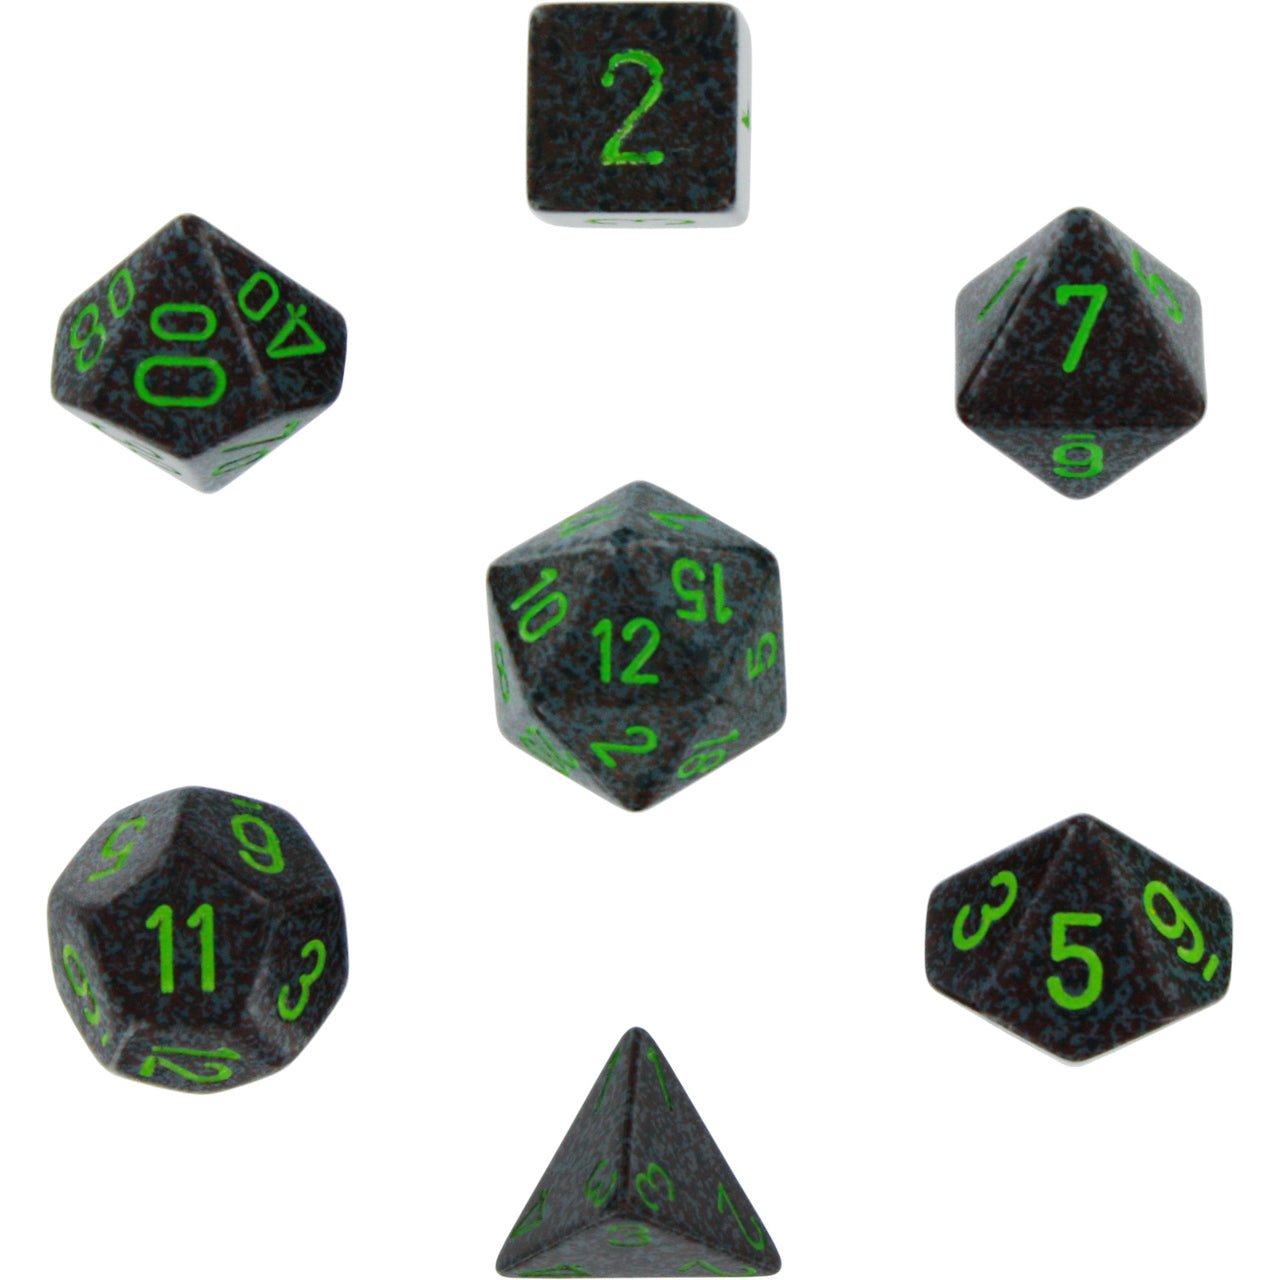 Chessex Dice: 7 Die Set - Speckled - Earth (CHX 25310) - Gamescape